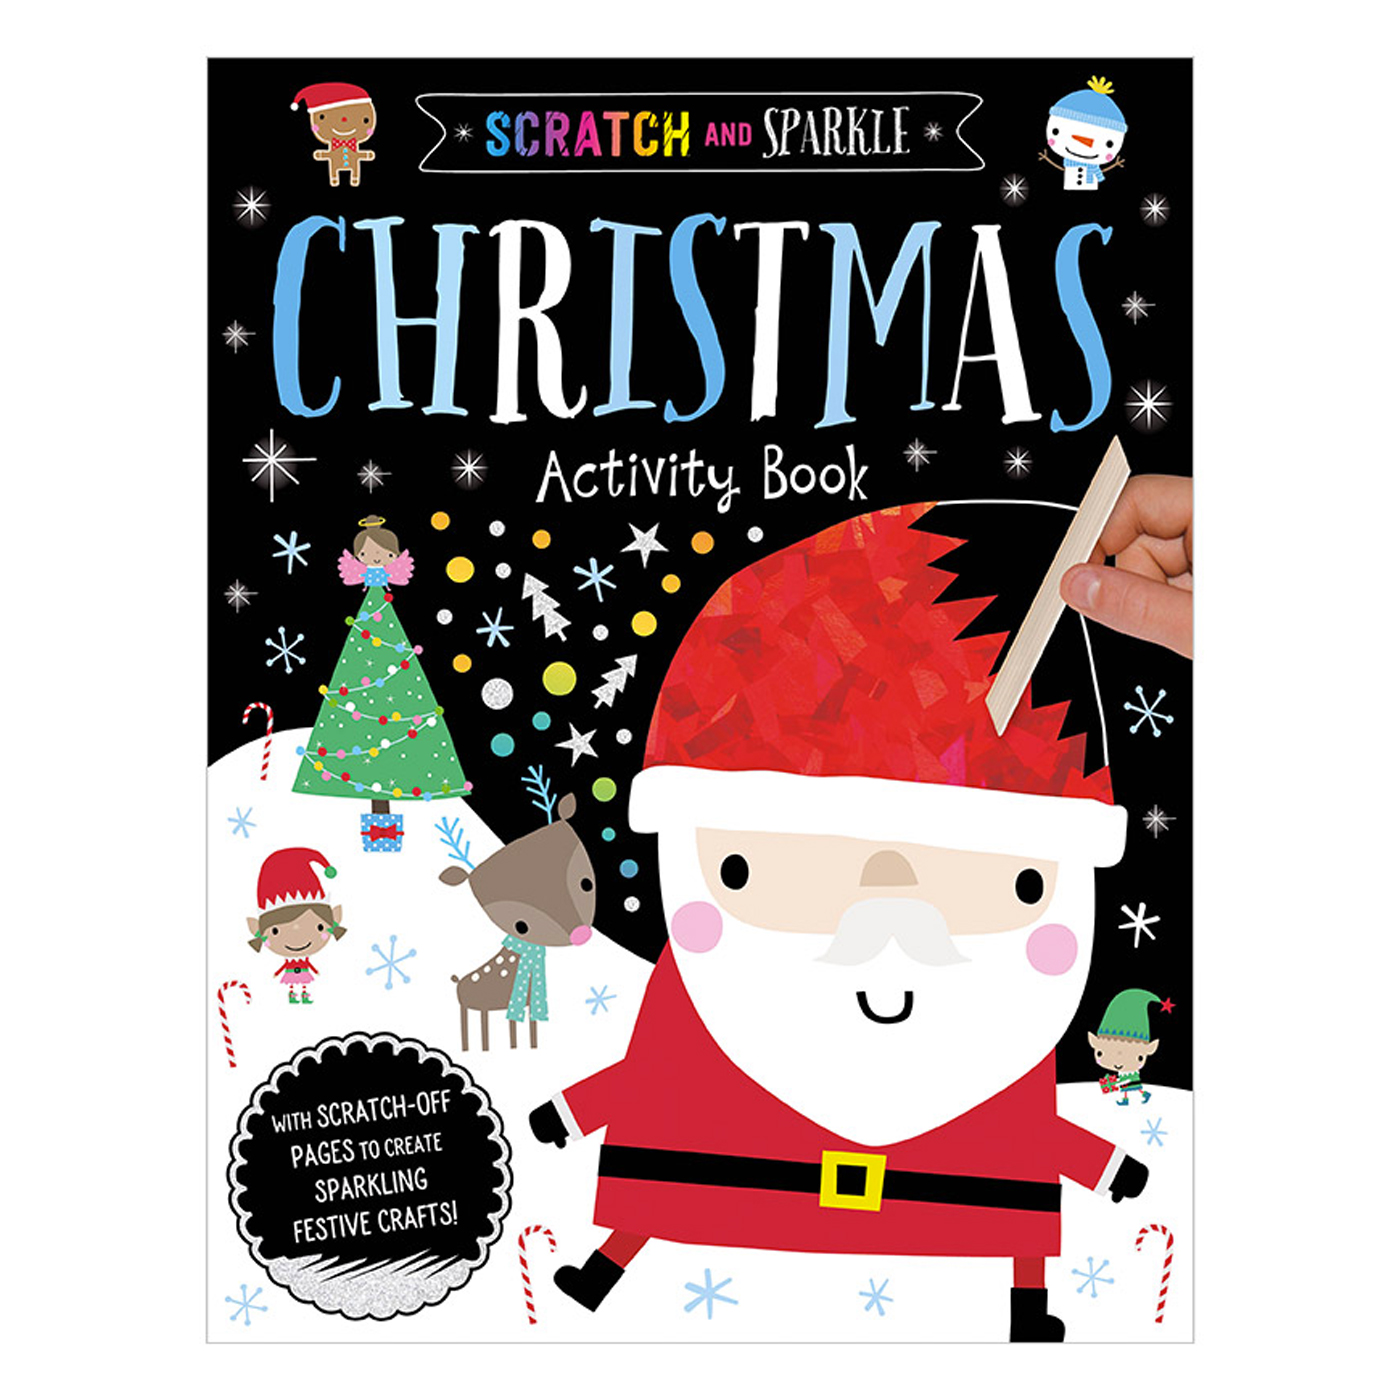  Scratch and Sparkle Christmas Activity Book